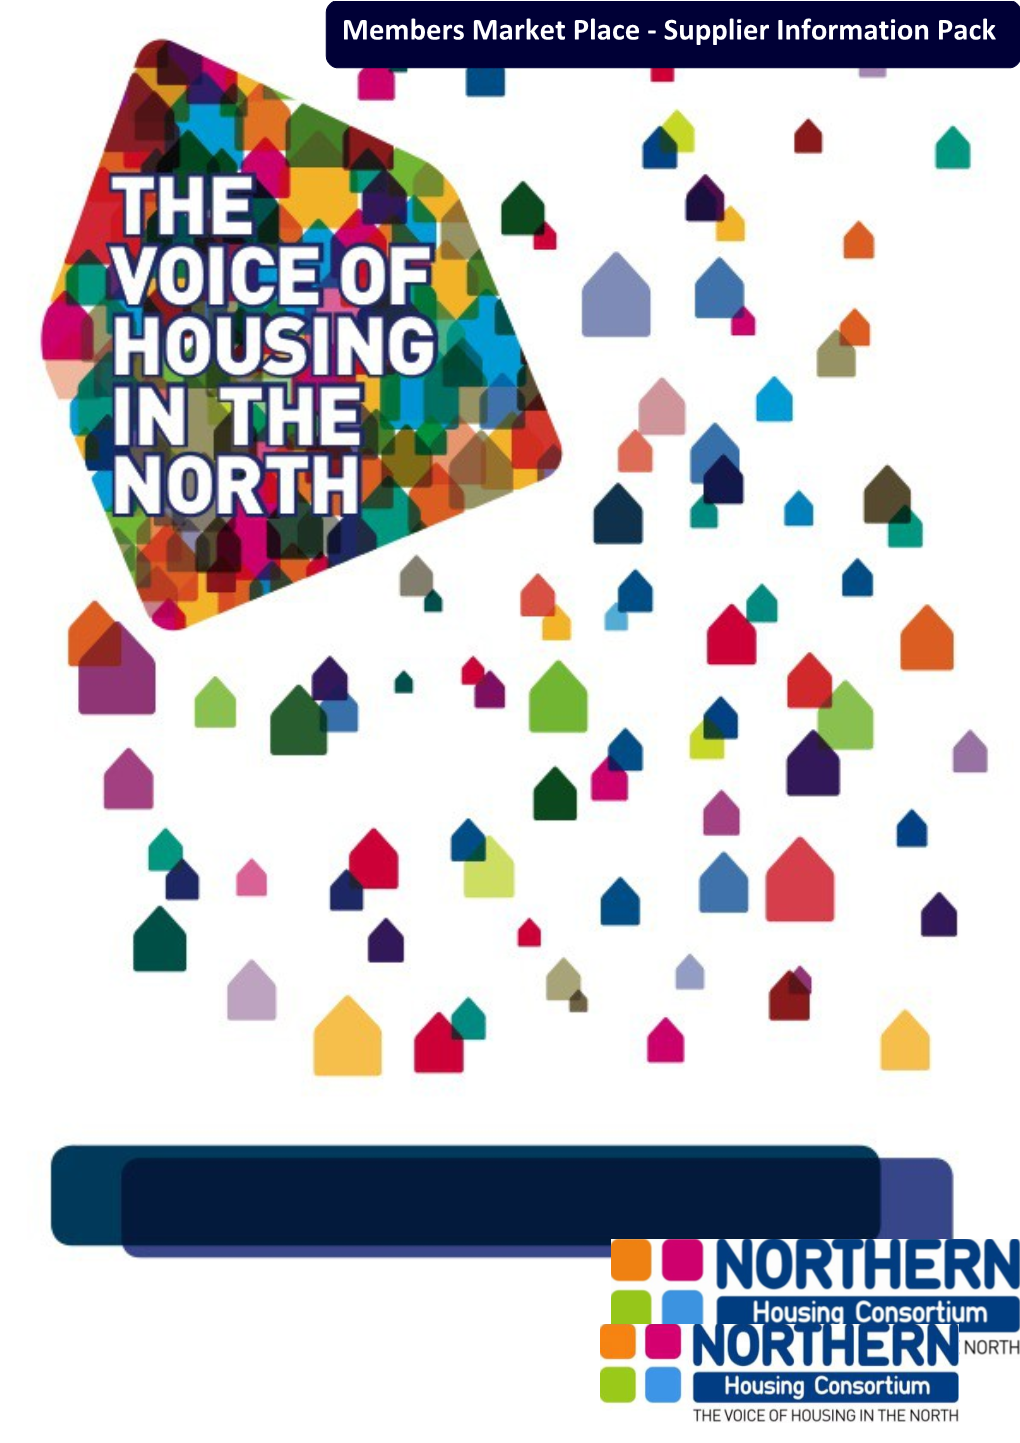 The Northern Housing Consortium (NHC) Represents the Views of Housing Organisations Across